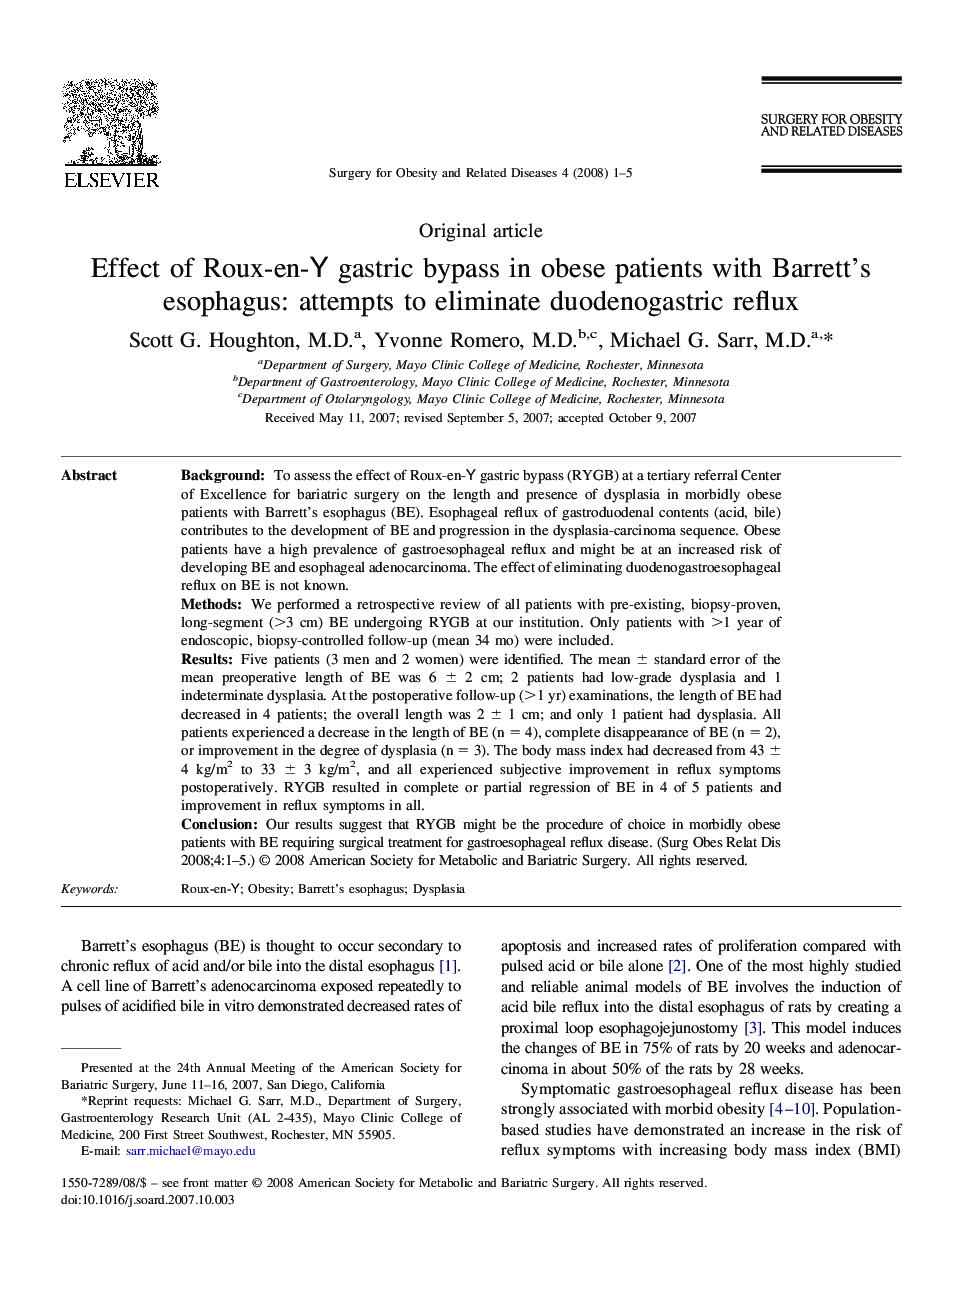 Effect of Roux-en-Y gastric bypass in obese patients with Barrett's esophagus: attempts to eliminate duodenogastric reflux